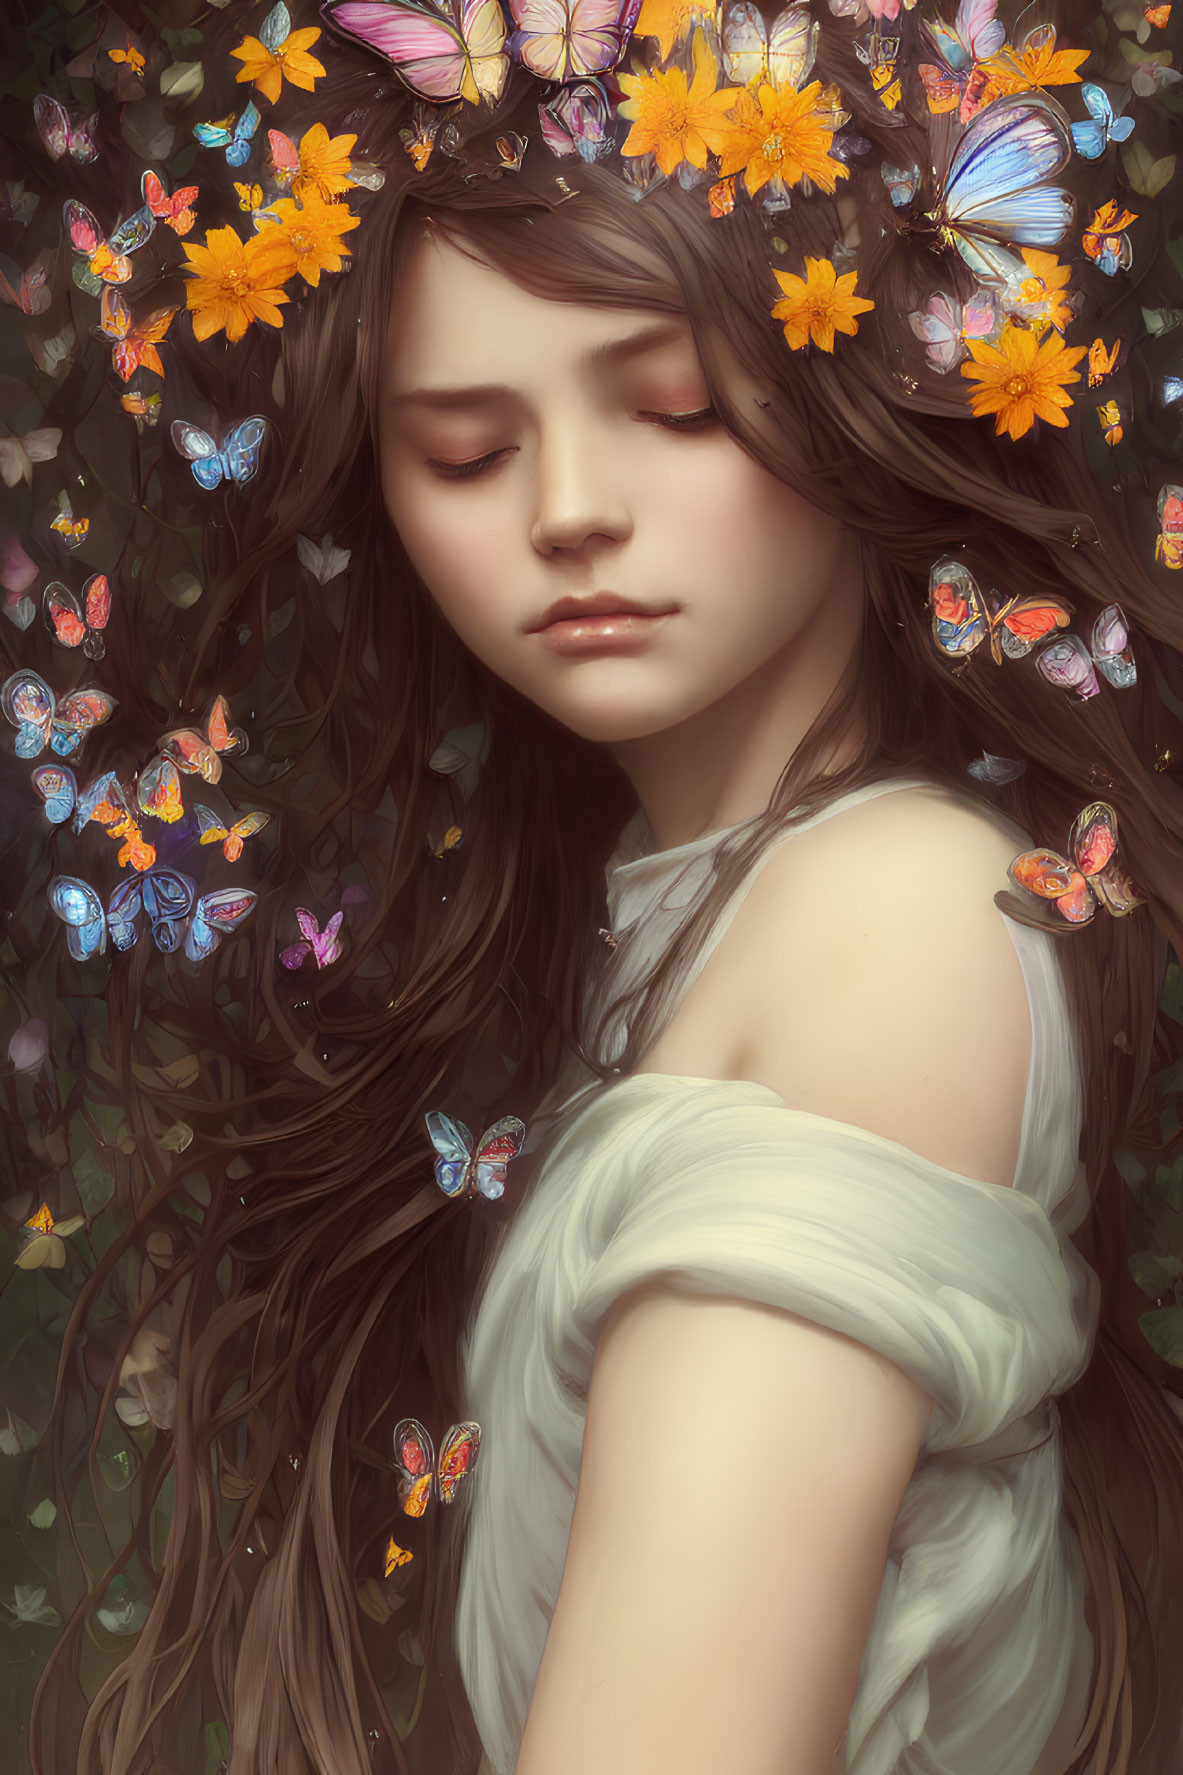 Young Woman with Flowers in Hair Surrounded by Colorful Butterflies